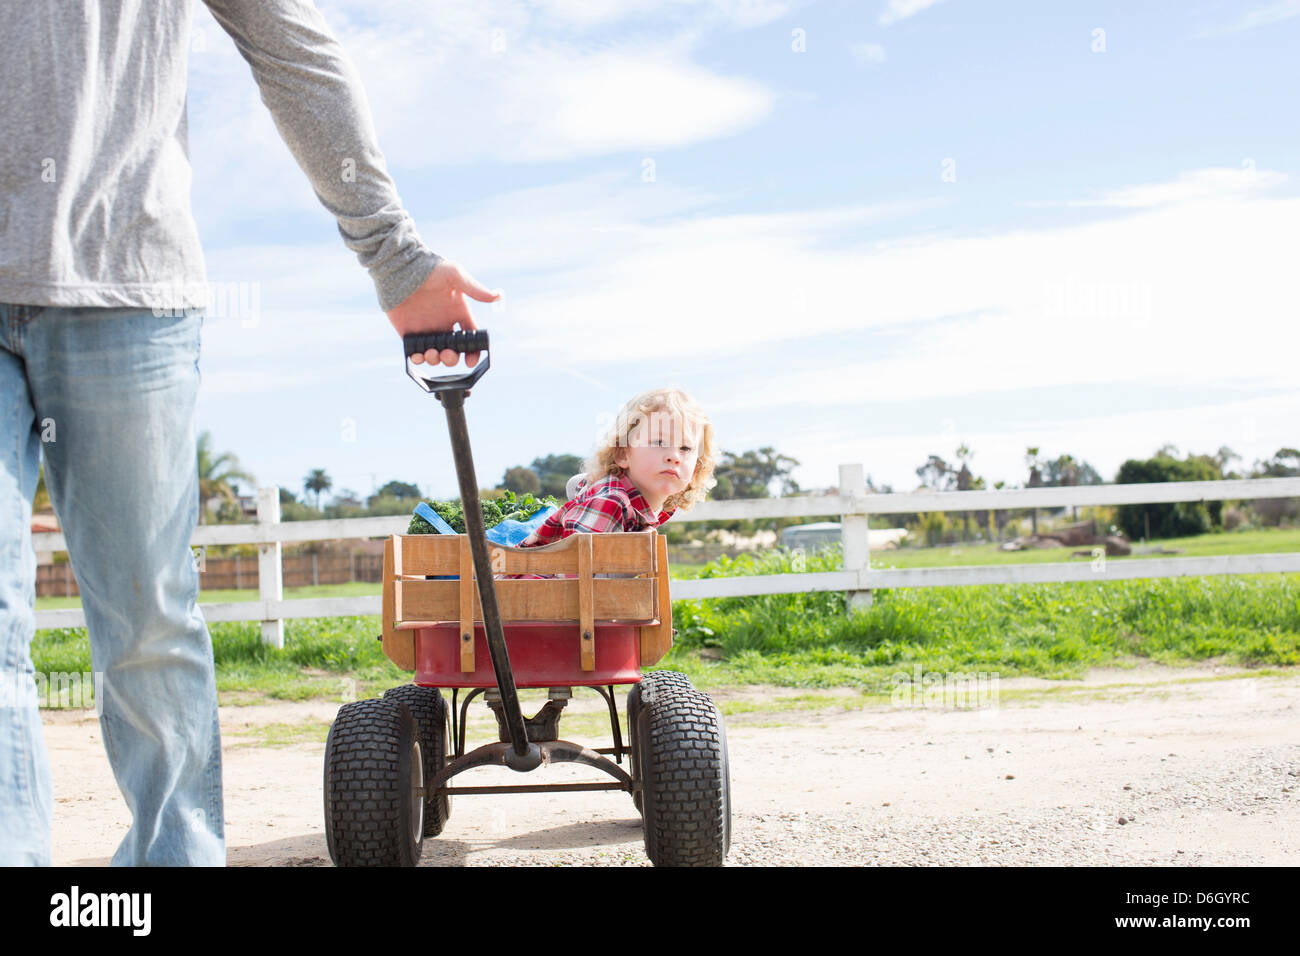 Father pulling son in wagon Stock Photo